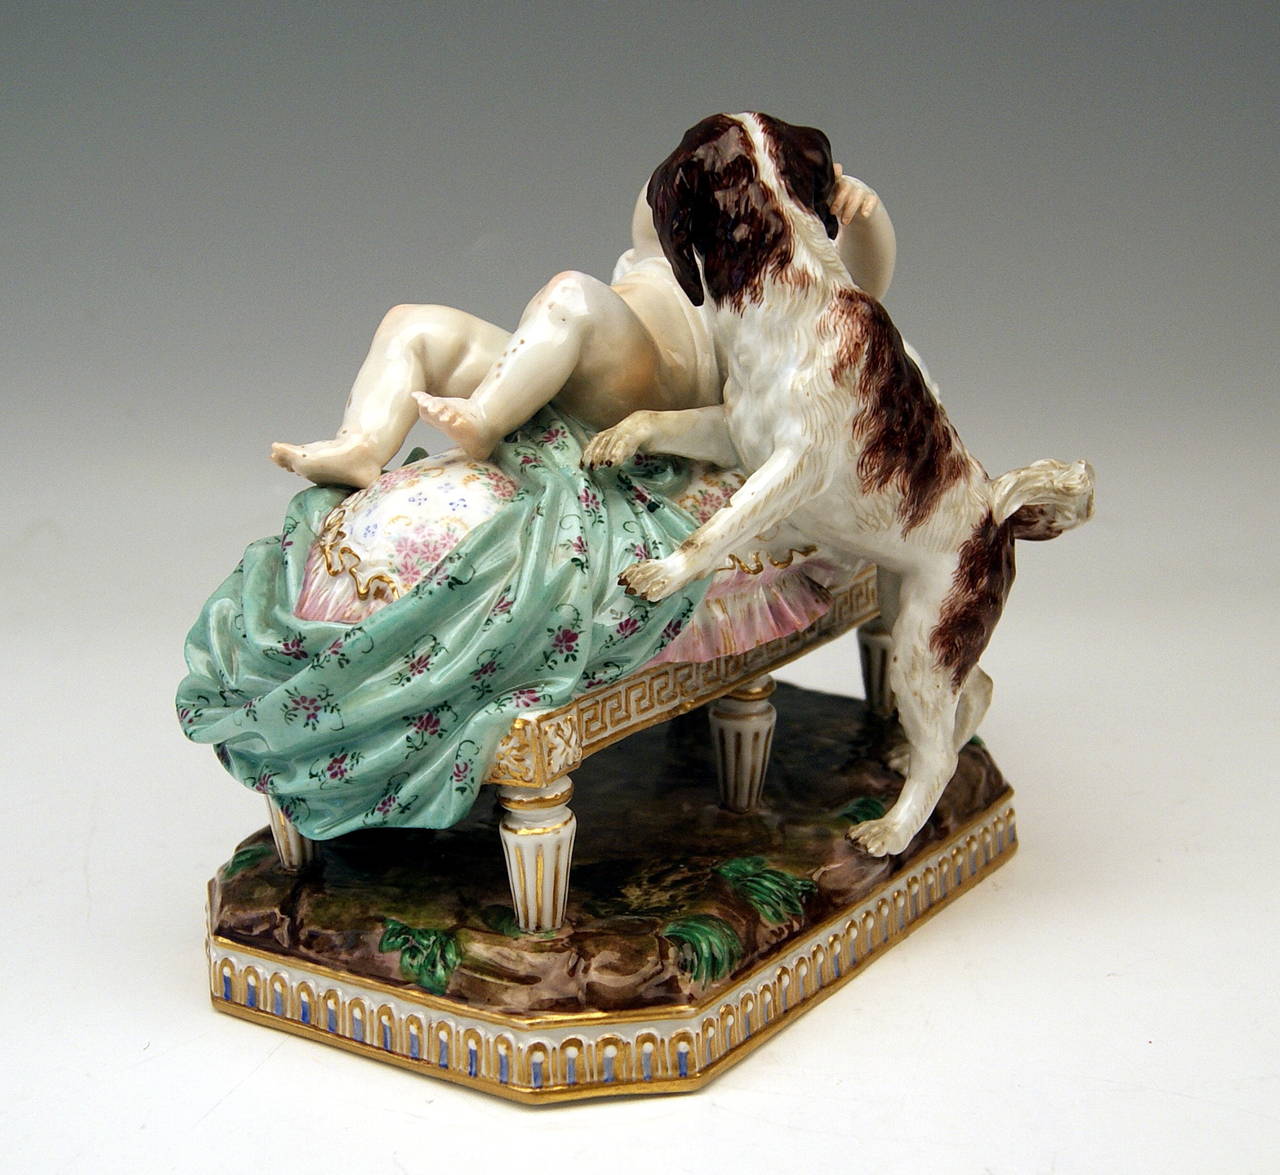 Rococo Meissen Lovely Figurine Group by Acier of the Placidness of Childhood, 1840 For Sale